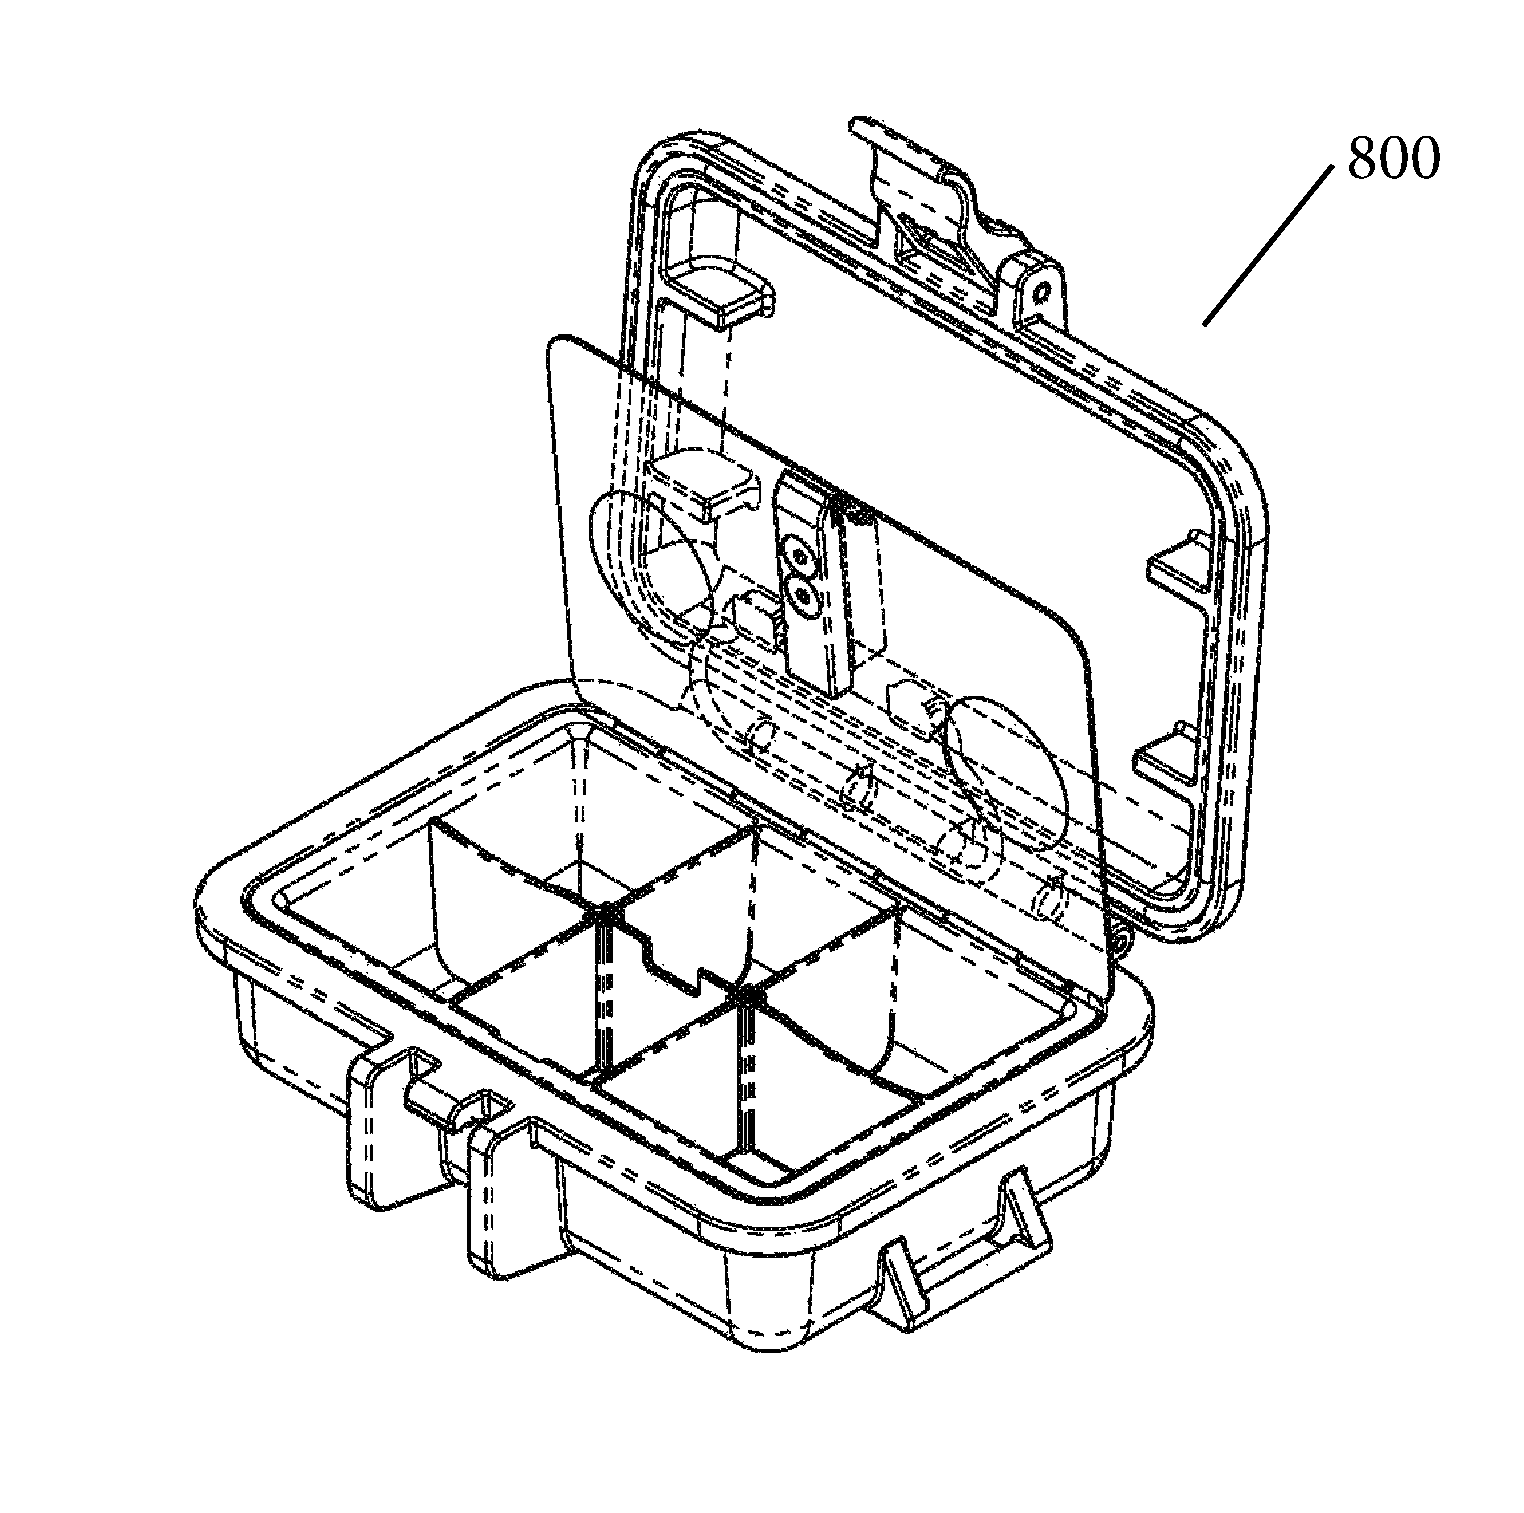 Protective box for surgery